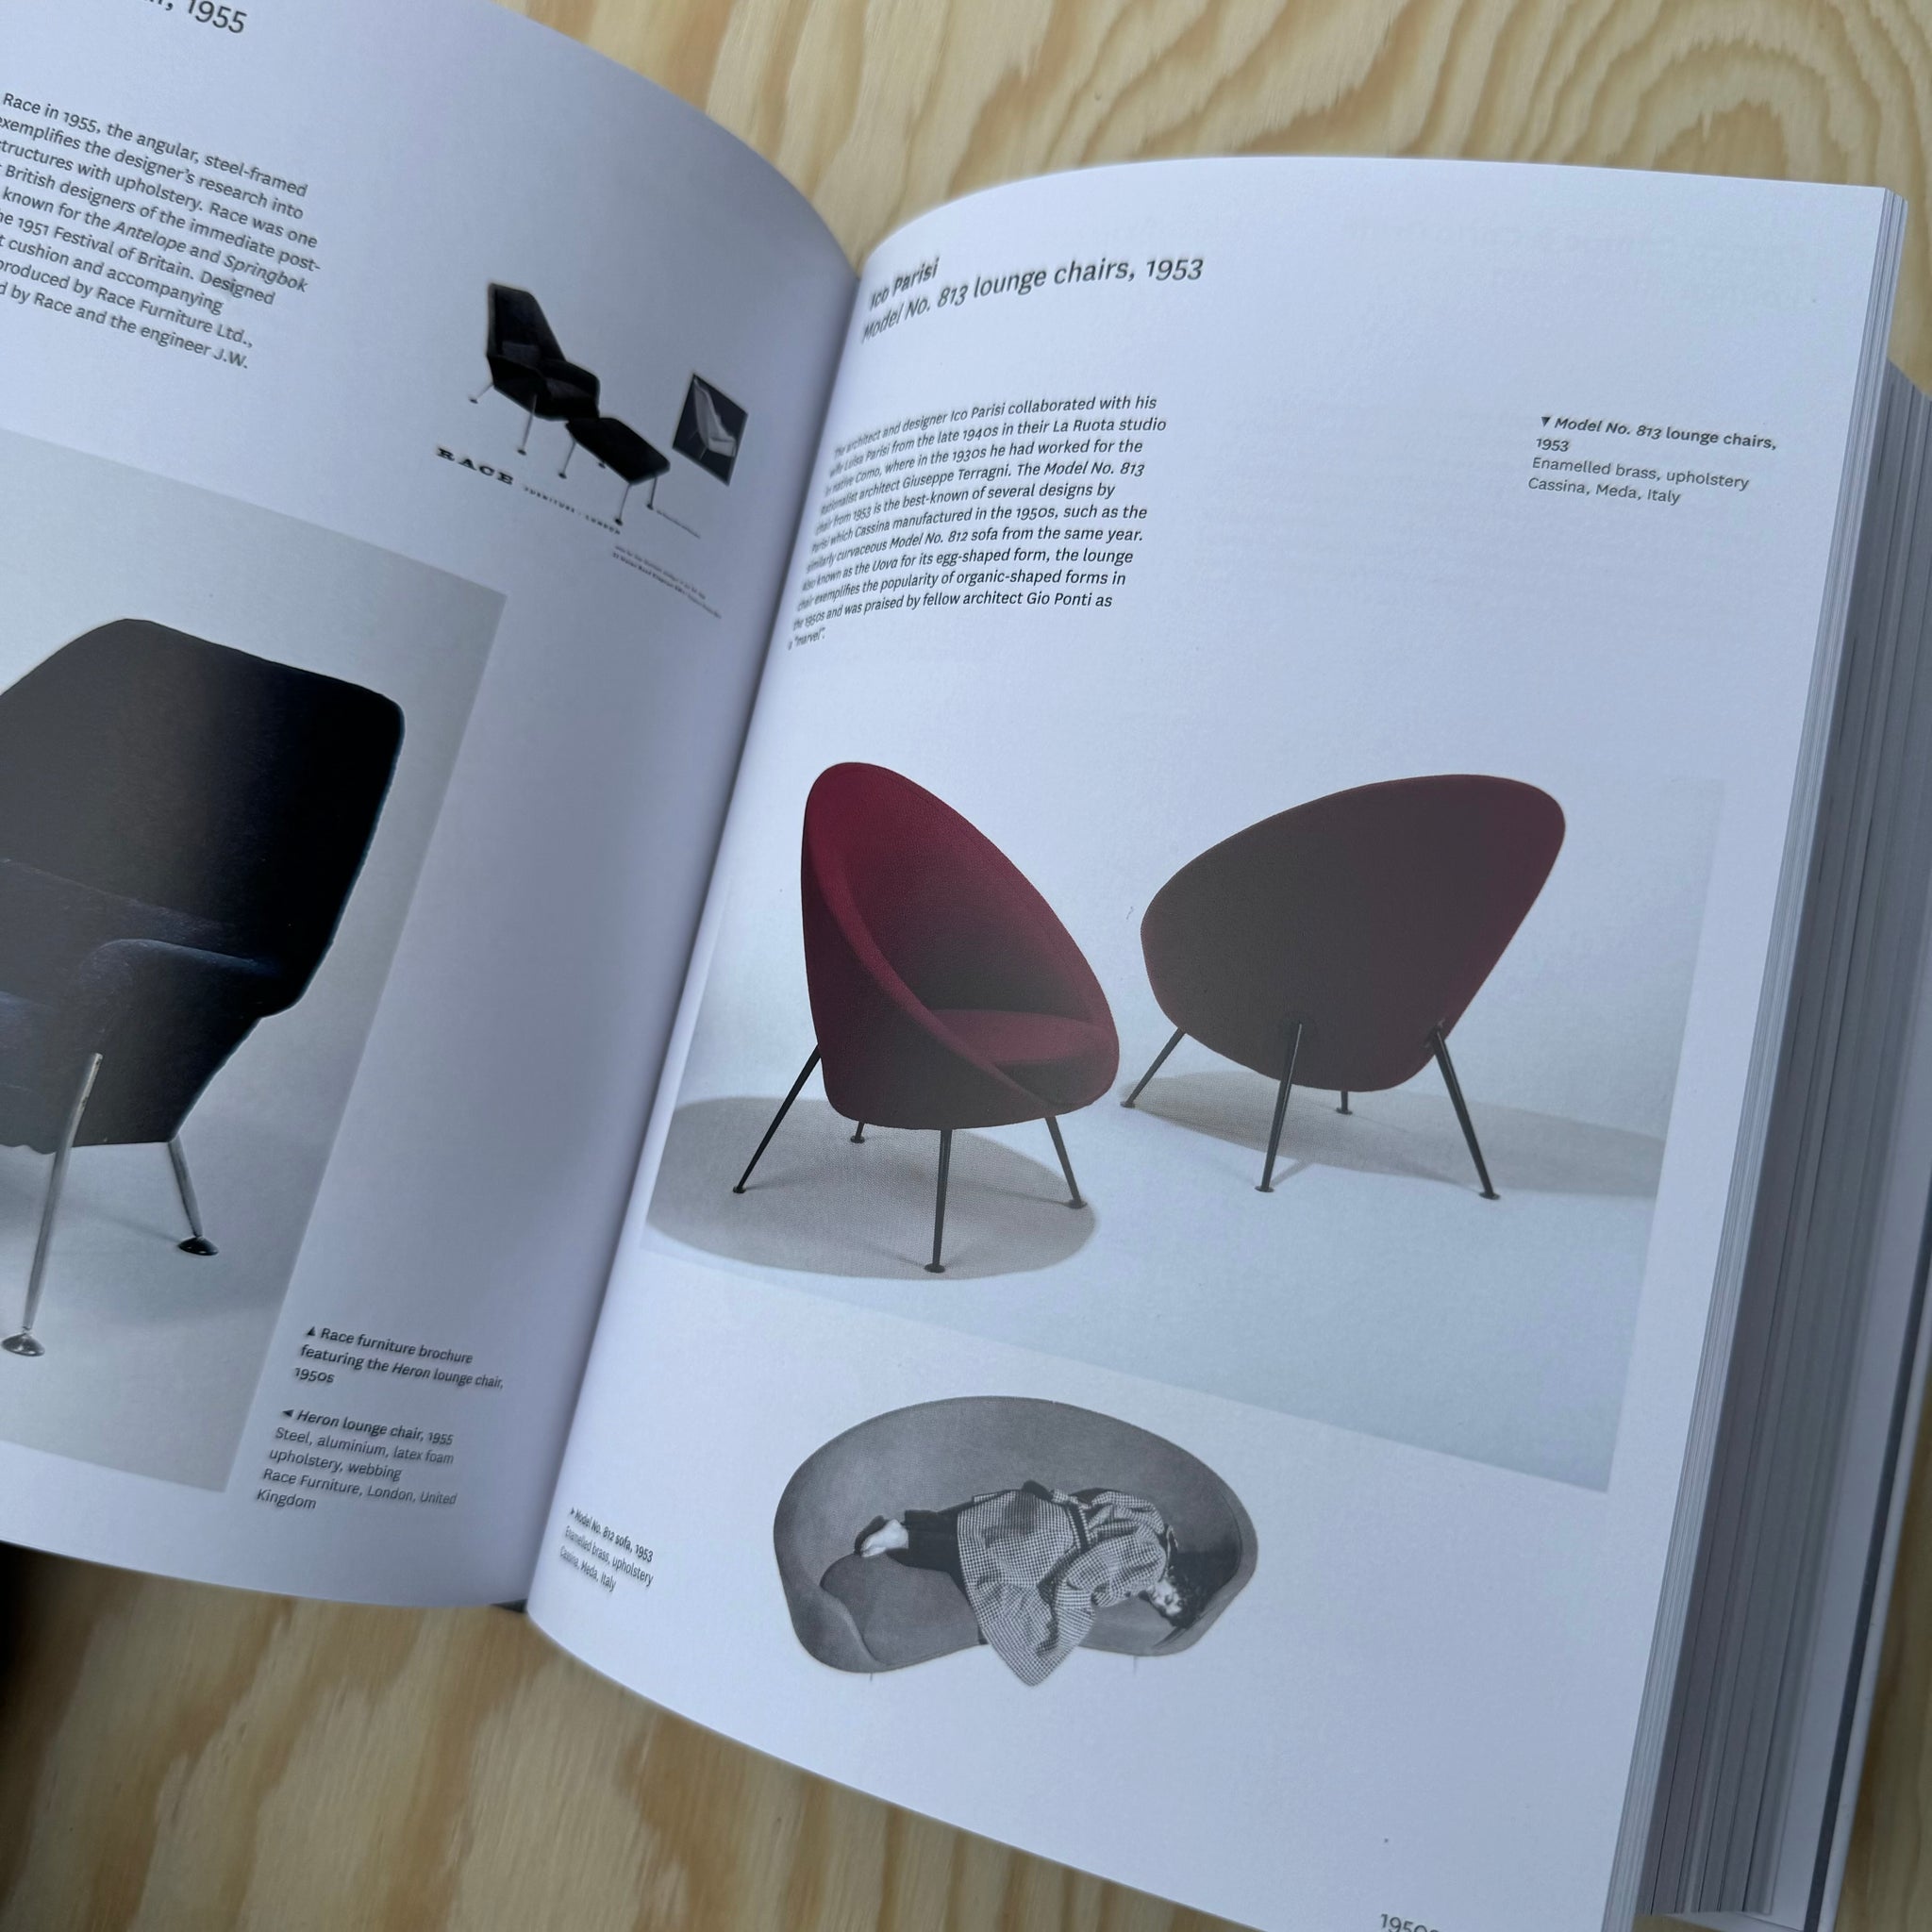 Chairs, 1,000 Masterpieces of Modern Design, 1800 to Present